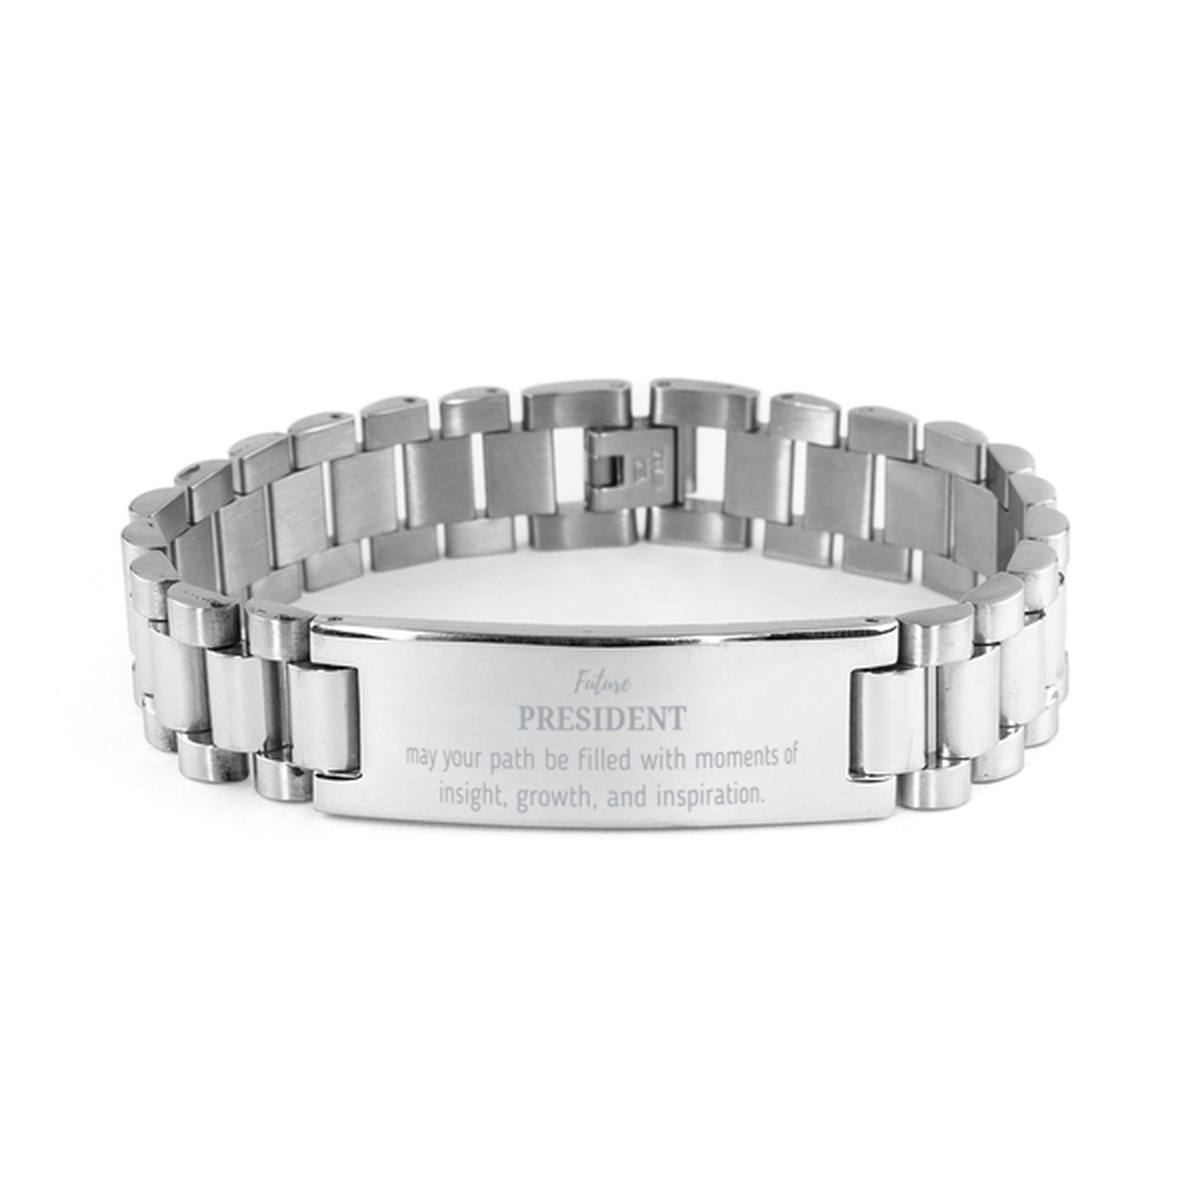 Future President Gifts, May your path be filled with moments of insight, Graduation Gifts for New President, Christmas Unique Ladder Stainless Steel Bracelet For Men, Women, Friends